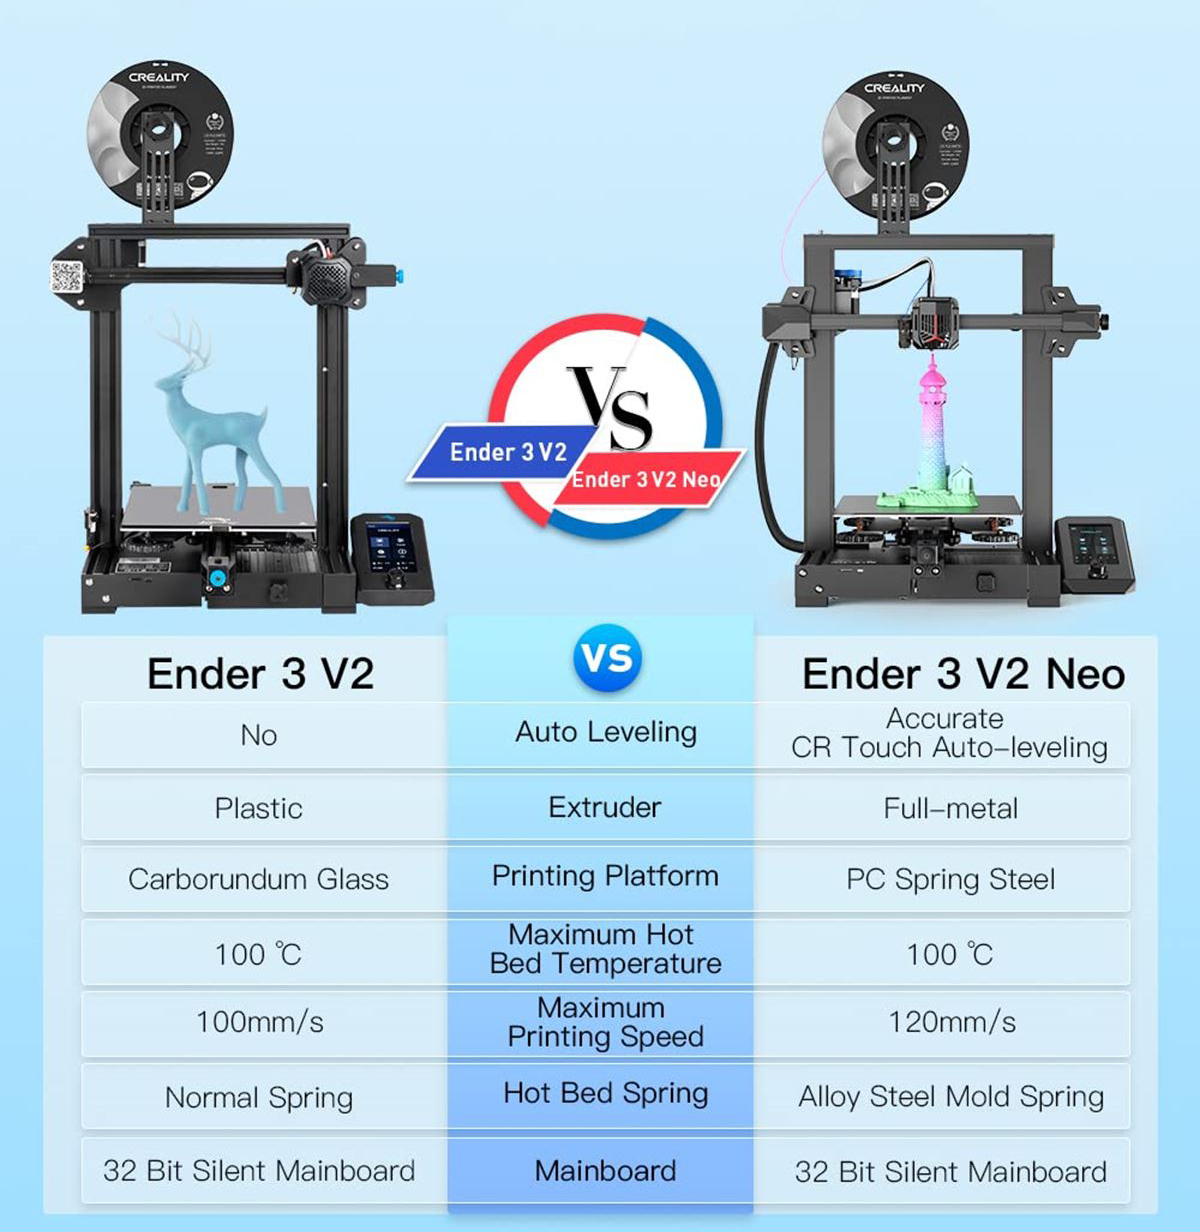 Creality Ender 3 V2 Neo 3D Printer with CR Touch Auto Leveling Kit